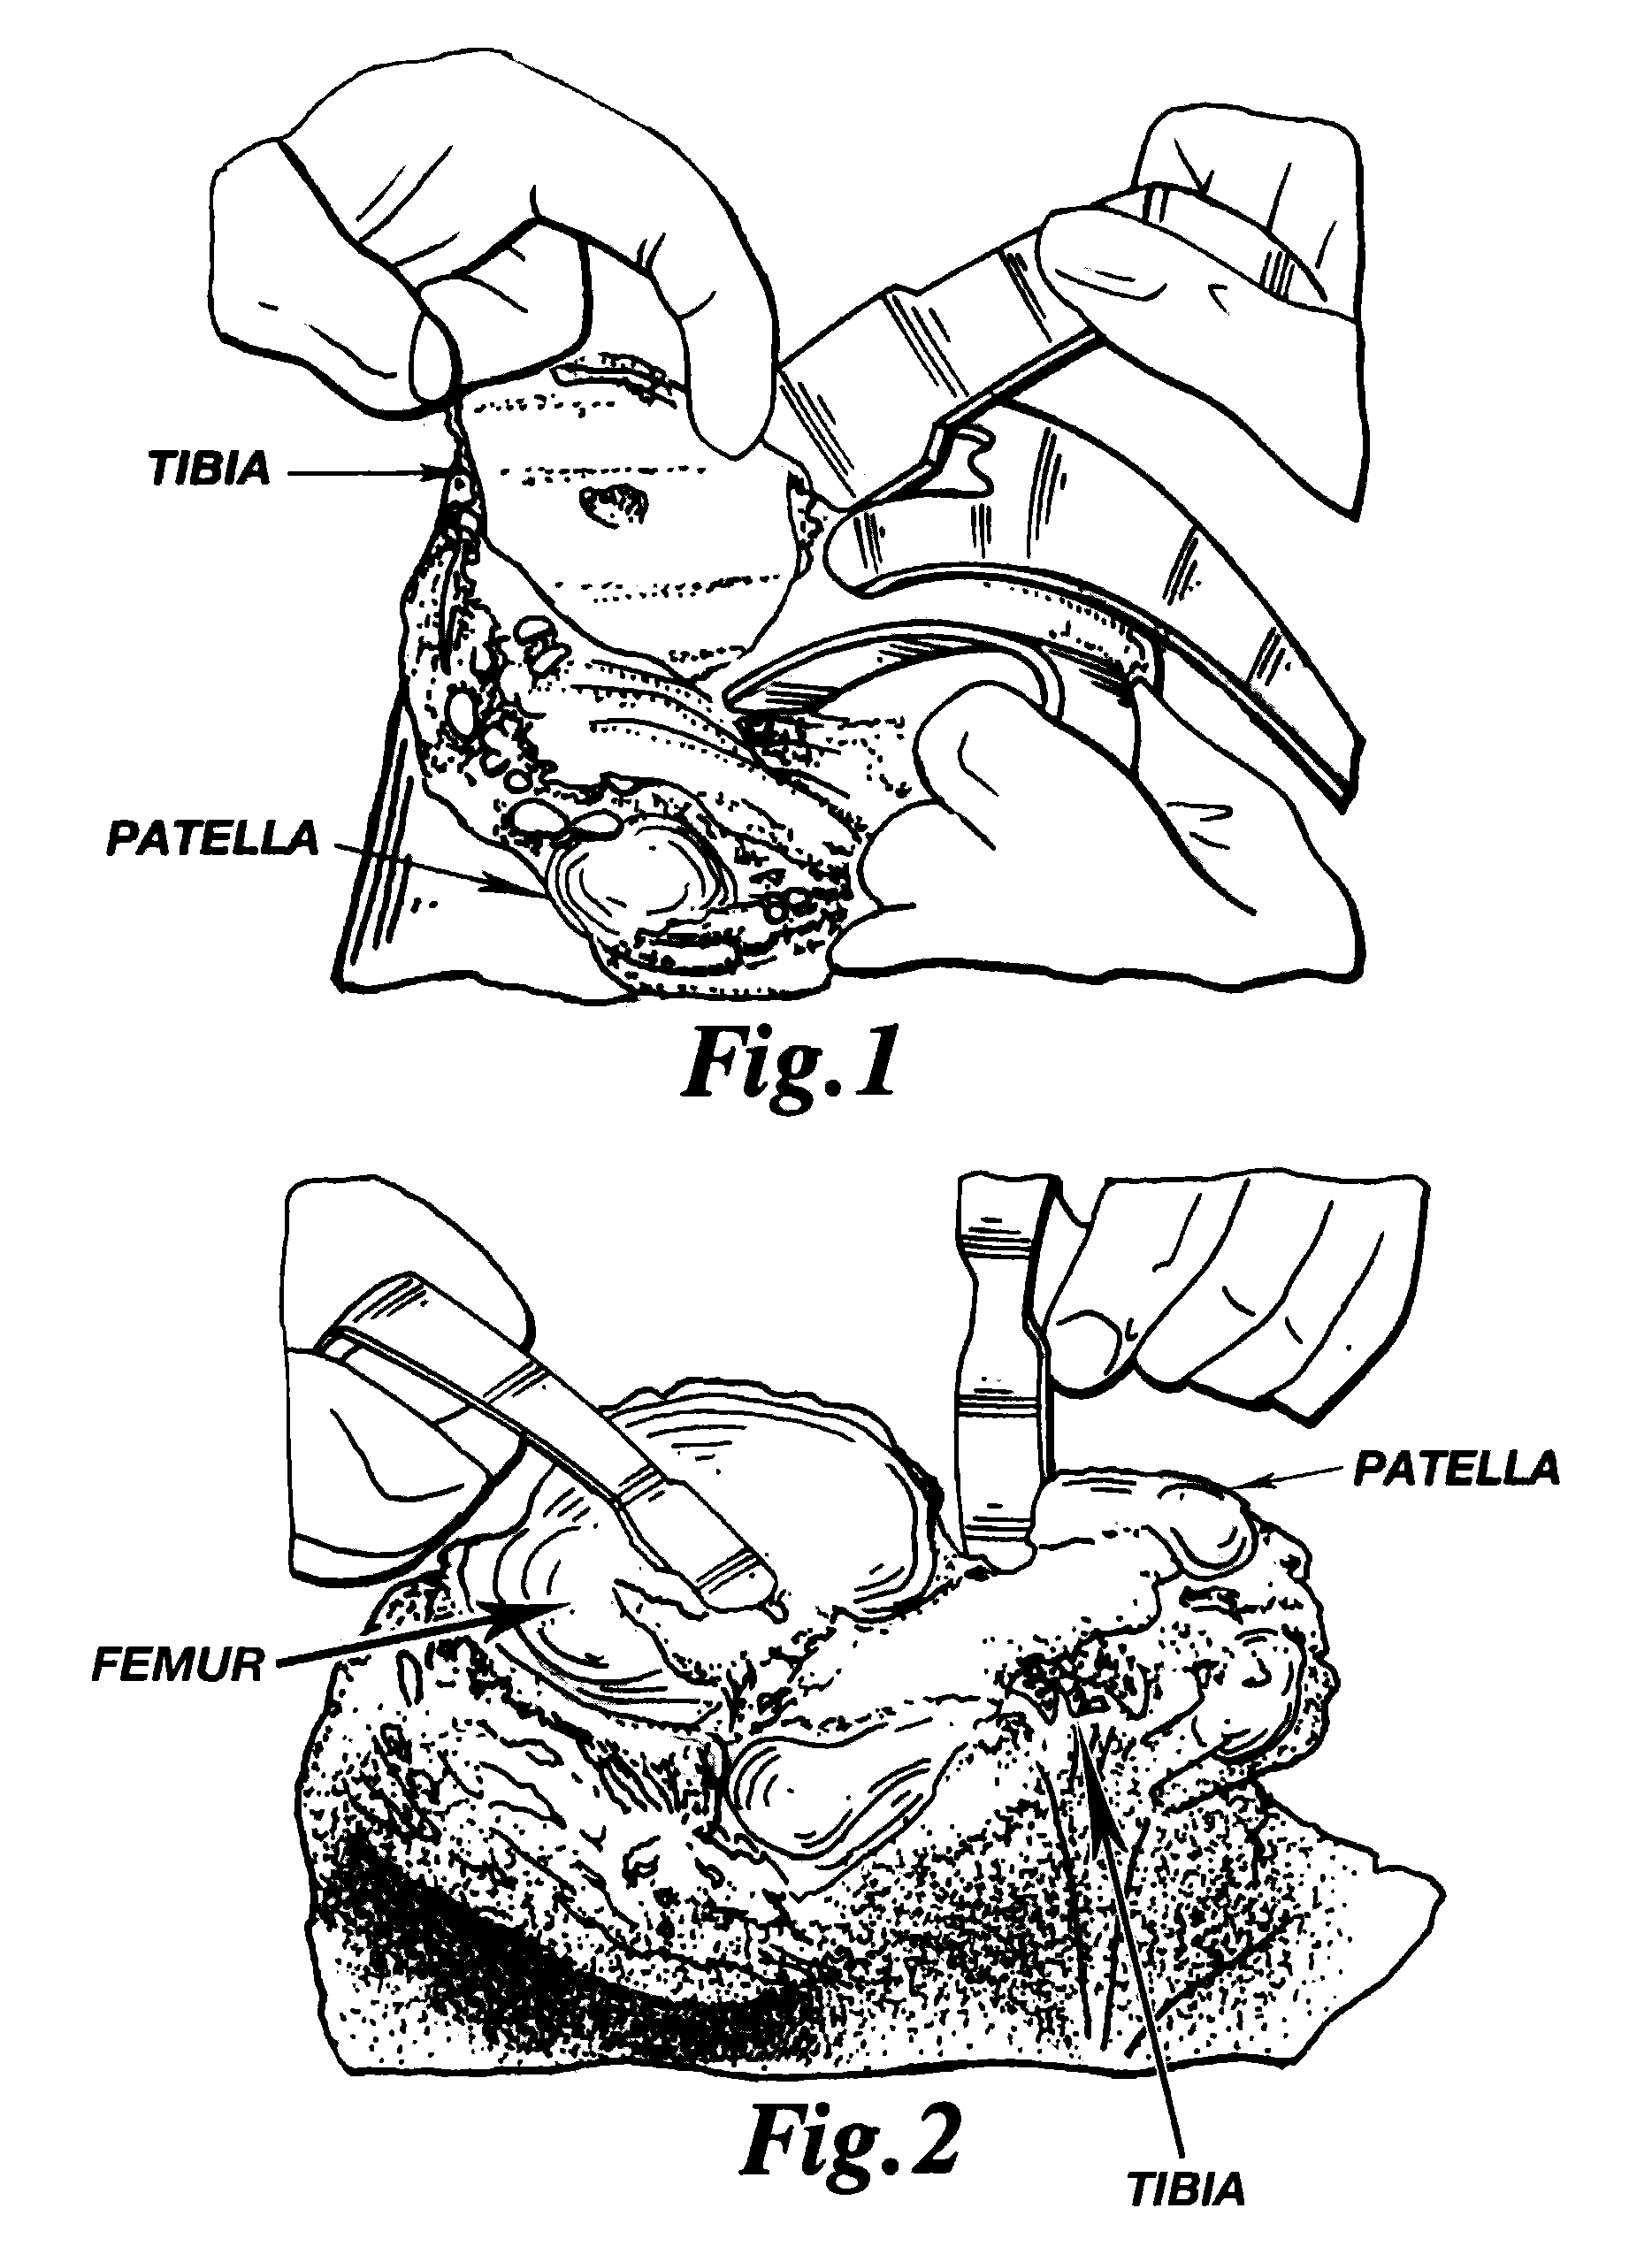 Methods and apparatus for improved cutting tools for resection